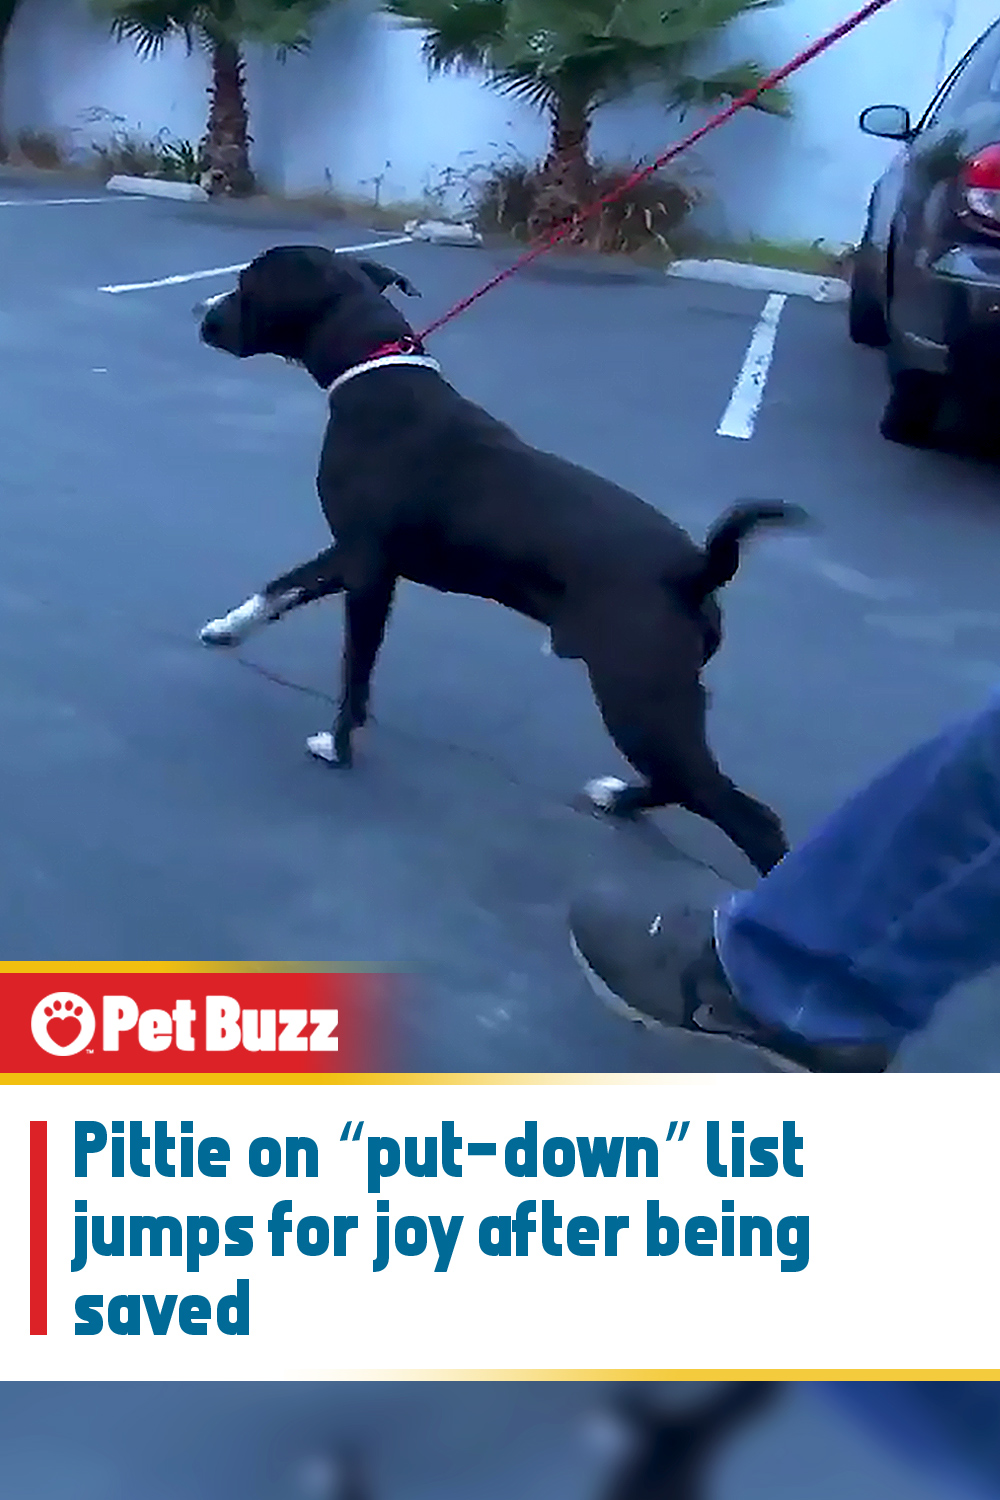 Pittie on “put-down” list jumps for joy after being saved